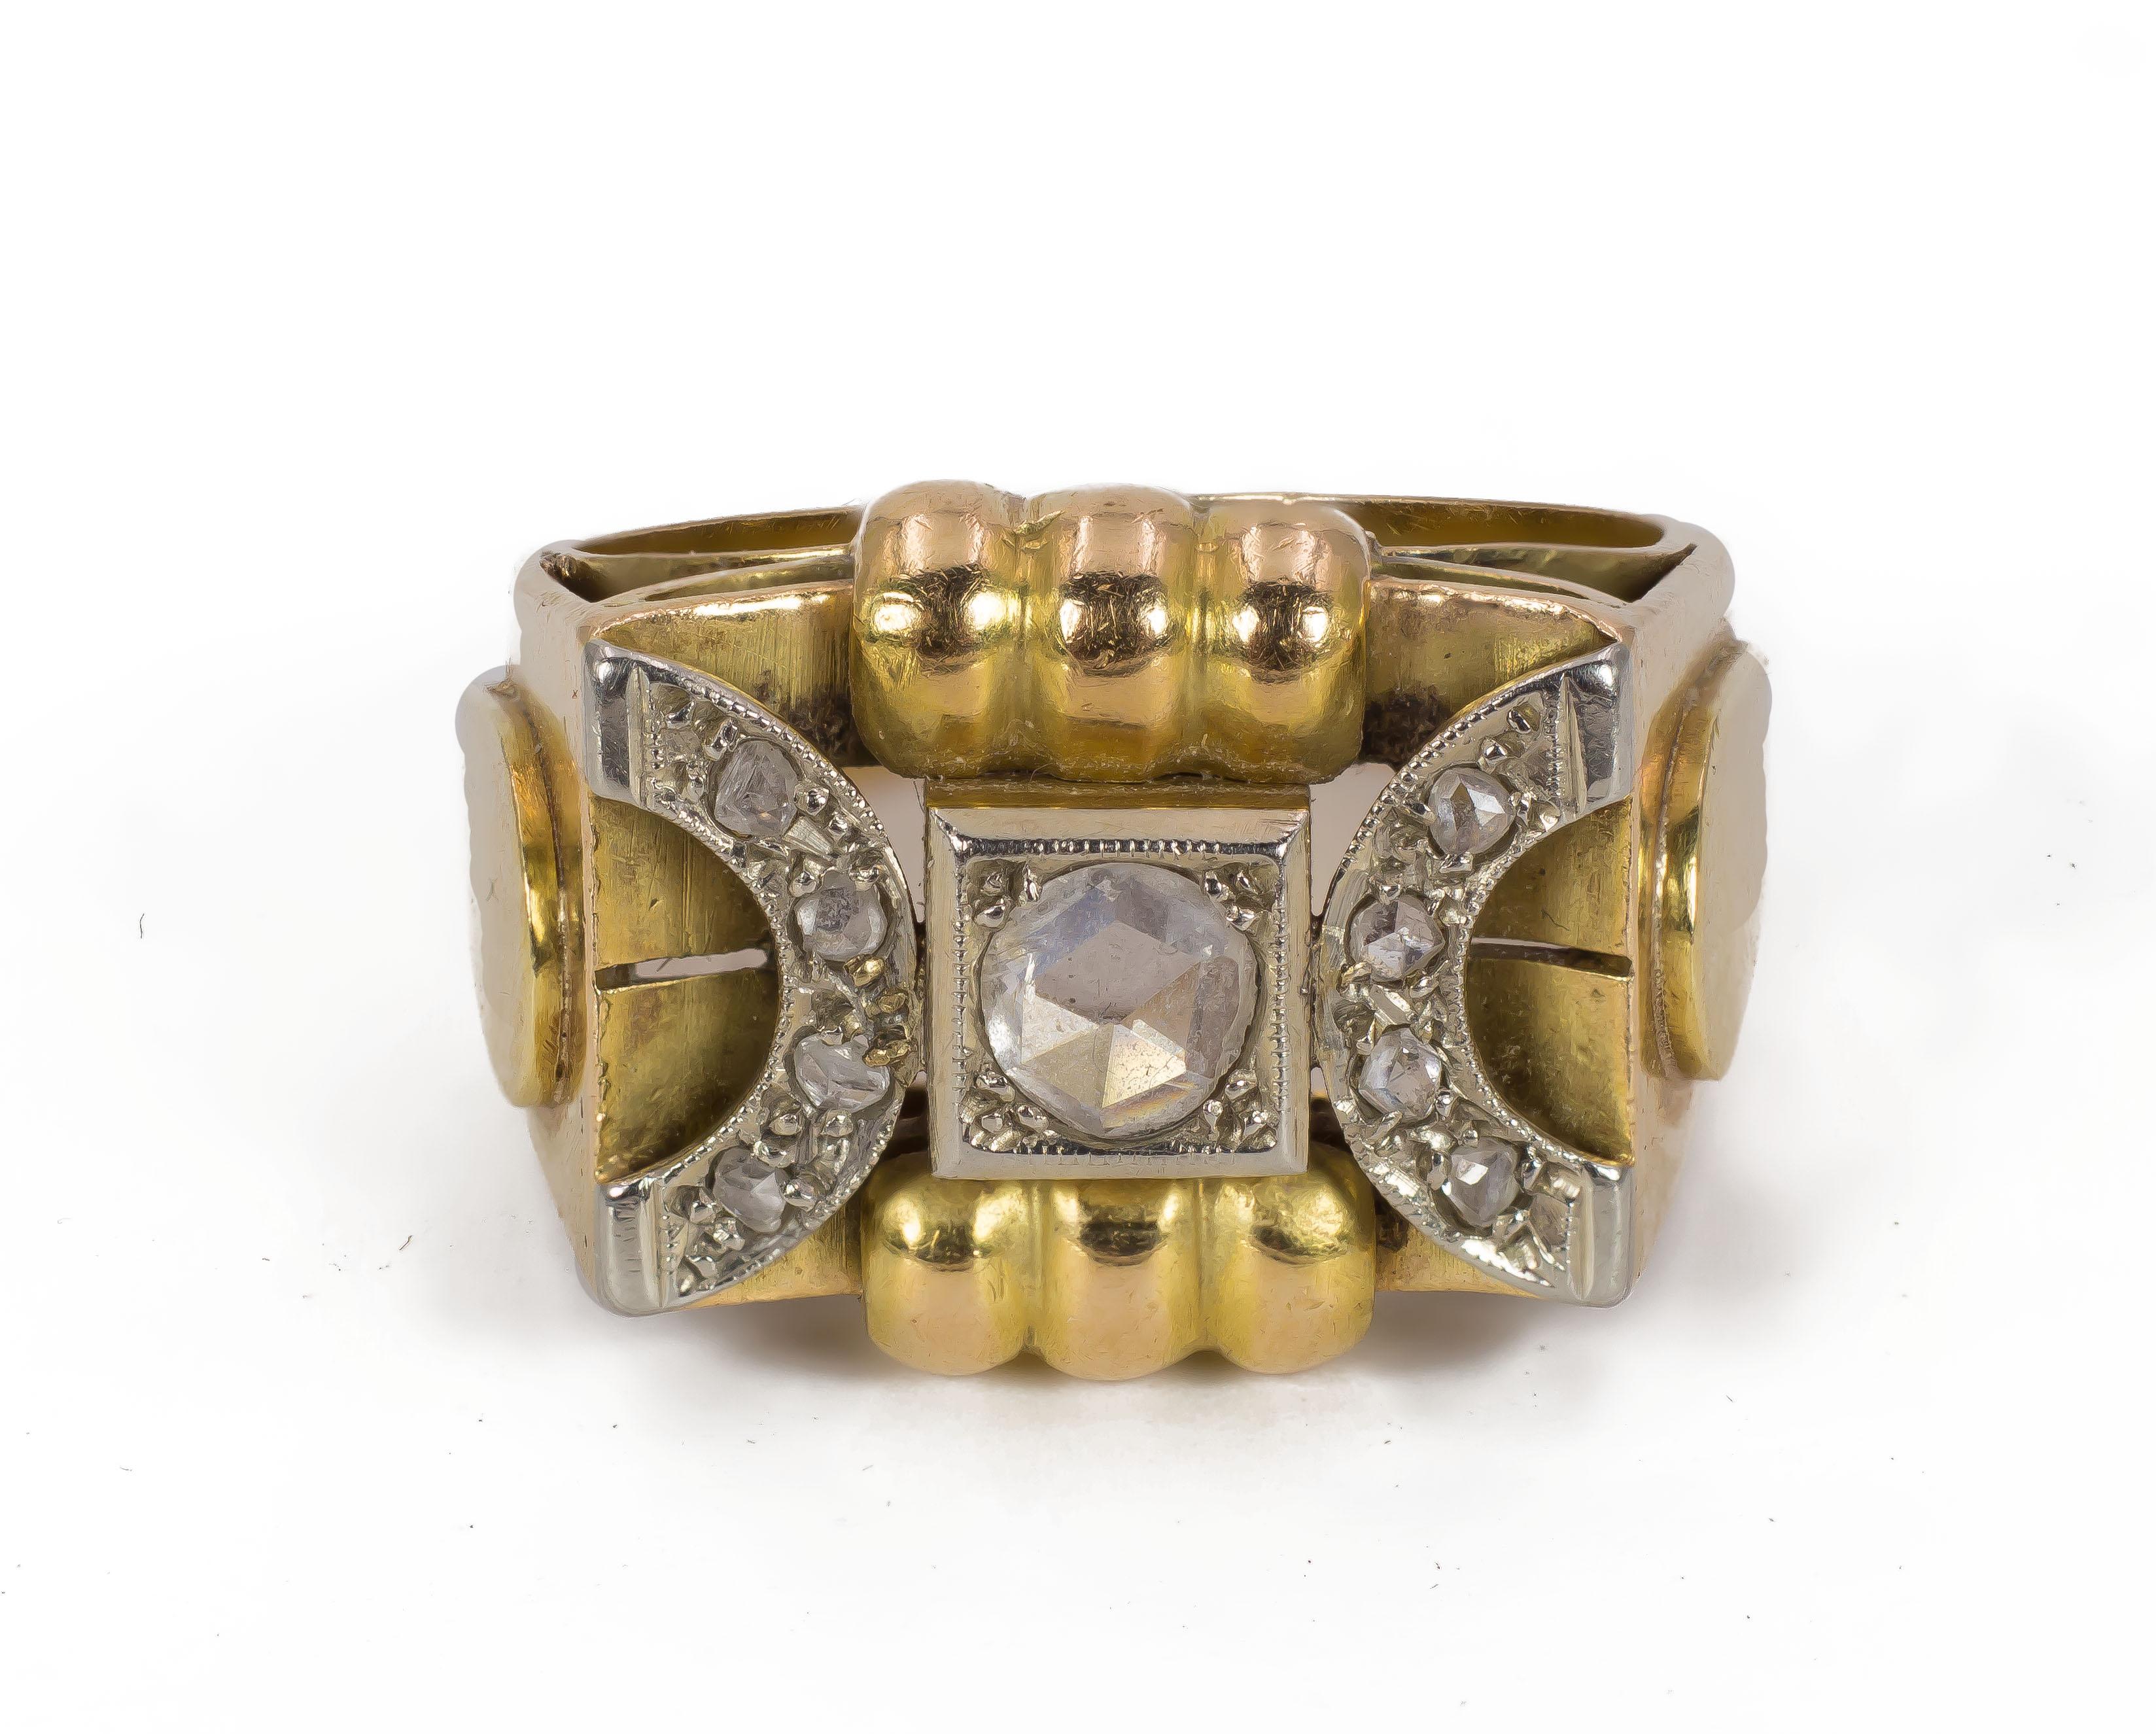 An antique ring, modelled in 18K gold, with a beautiful shape: it is set with a central rose cut diamond, flanked on either side by a semicircular decoration, embellished with rose cut diamonds. The ring dates from the 1930s/'40s

MATERIALS
18K gold